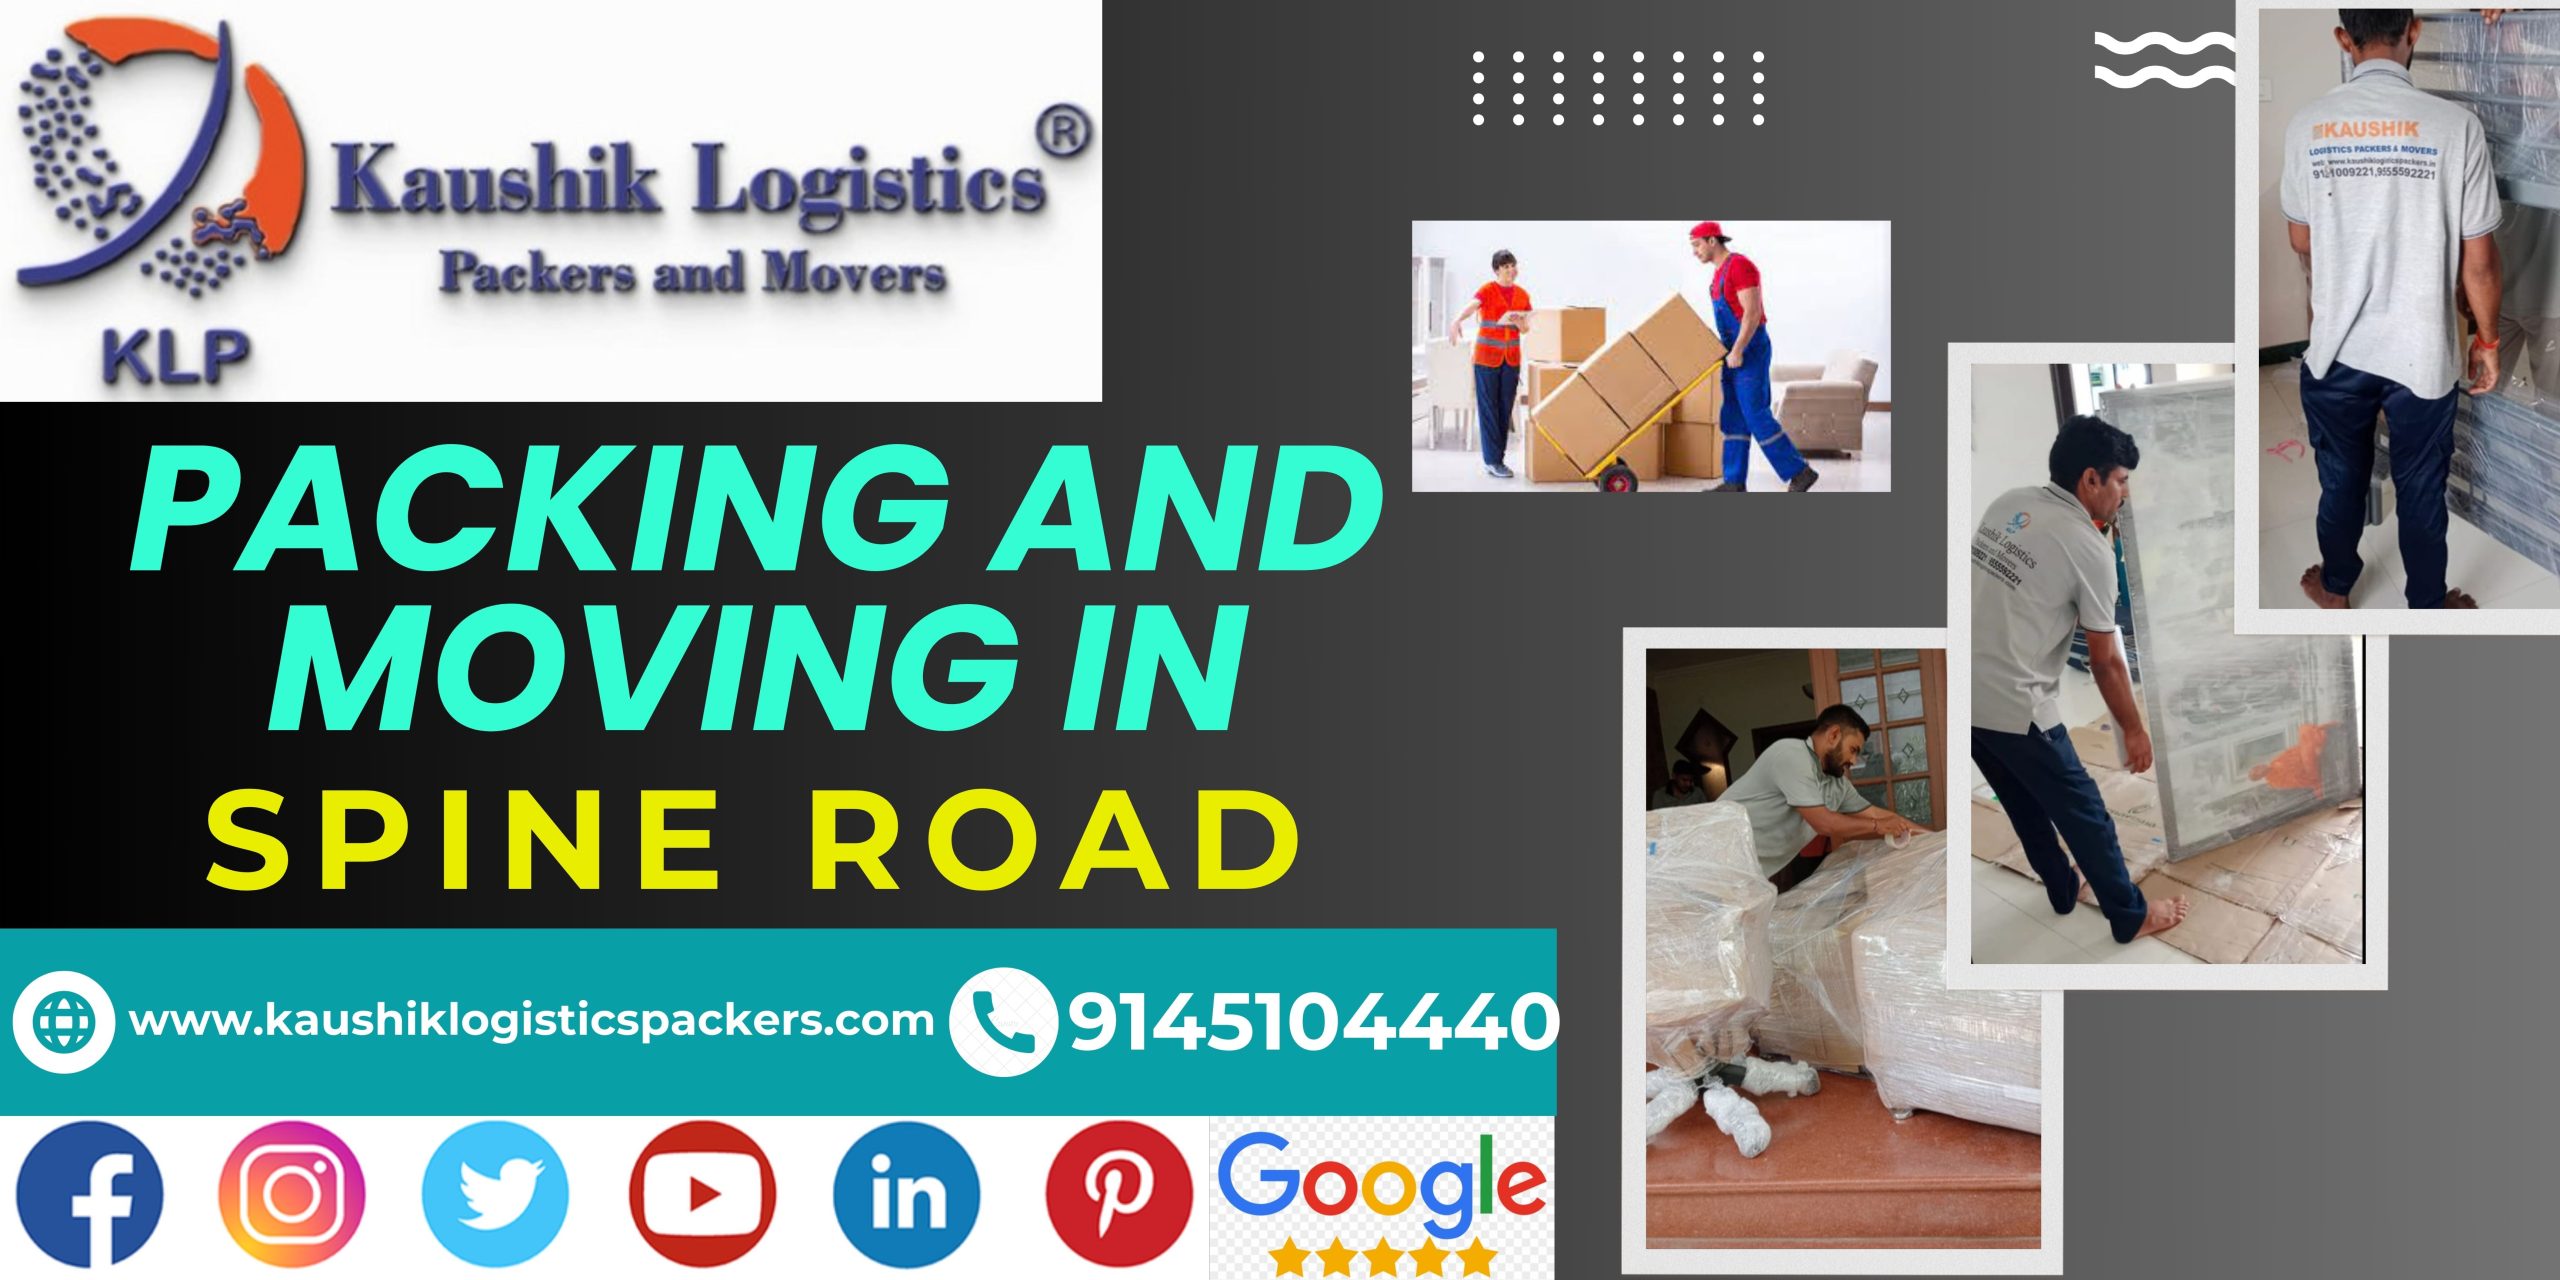 Packers and Movers In Spine Road